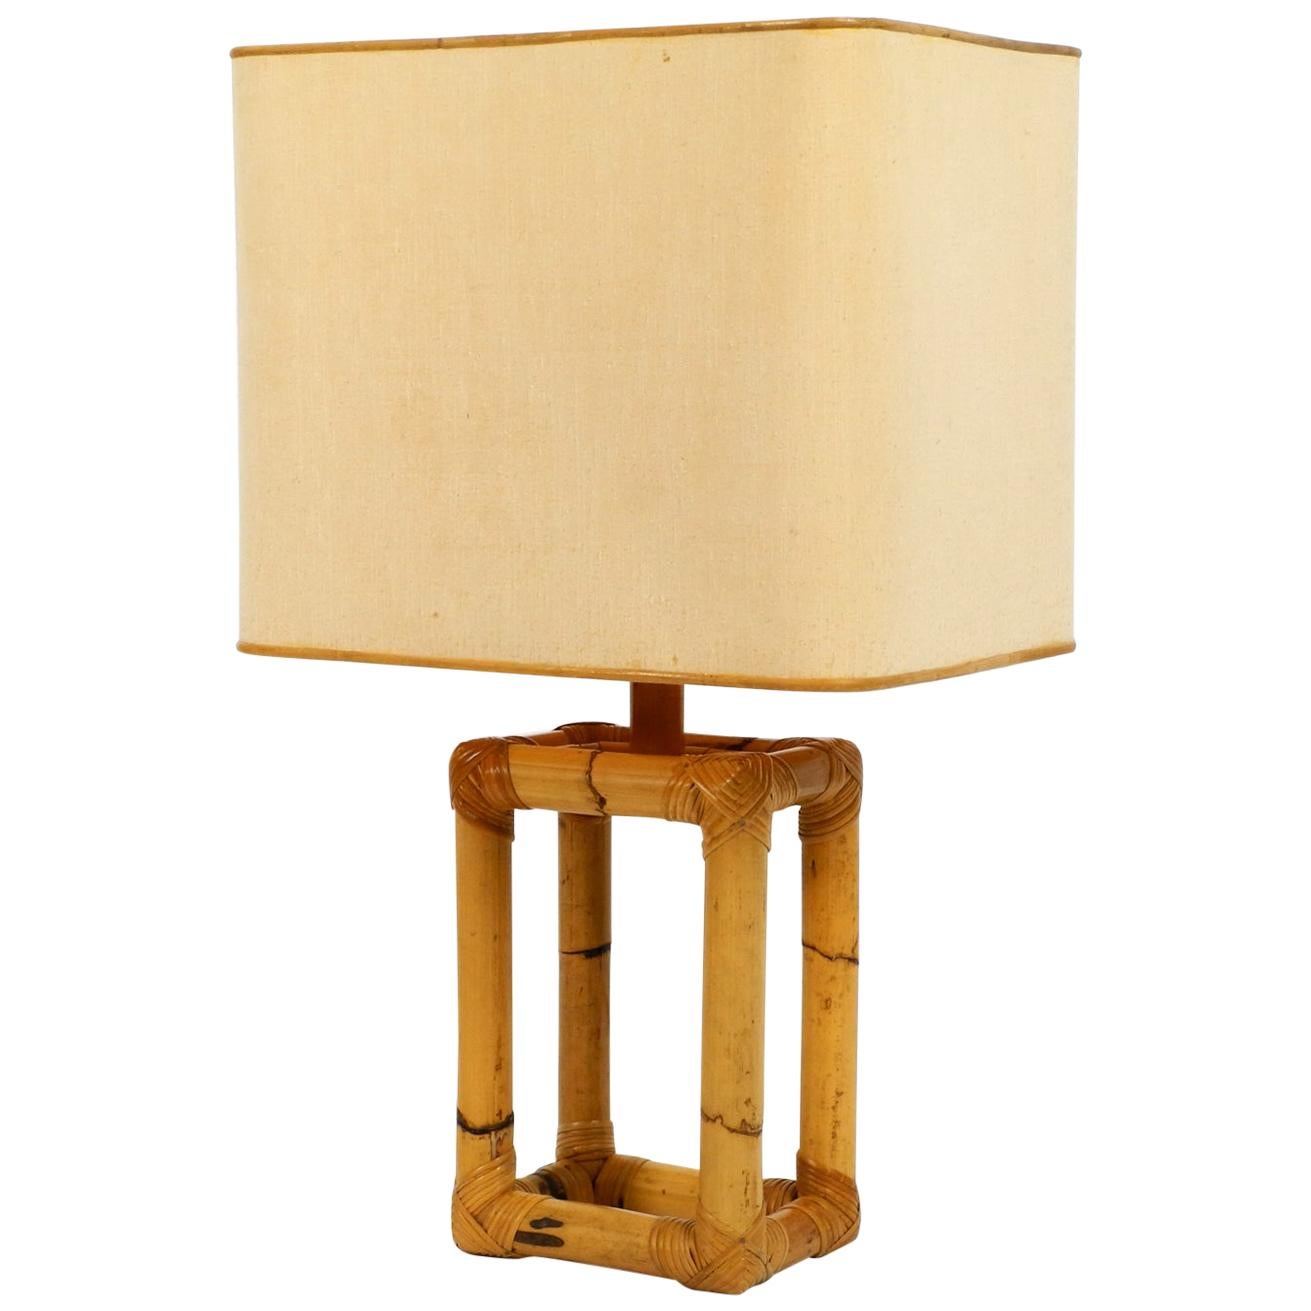 Extra Large 1960s Minimalist Bamboo Table Lamp with a Large Fabric Shade